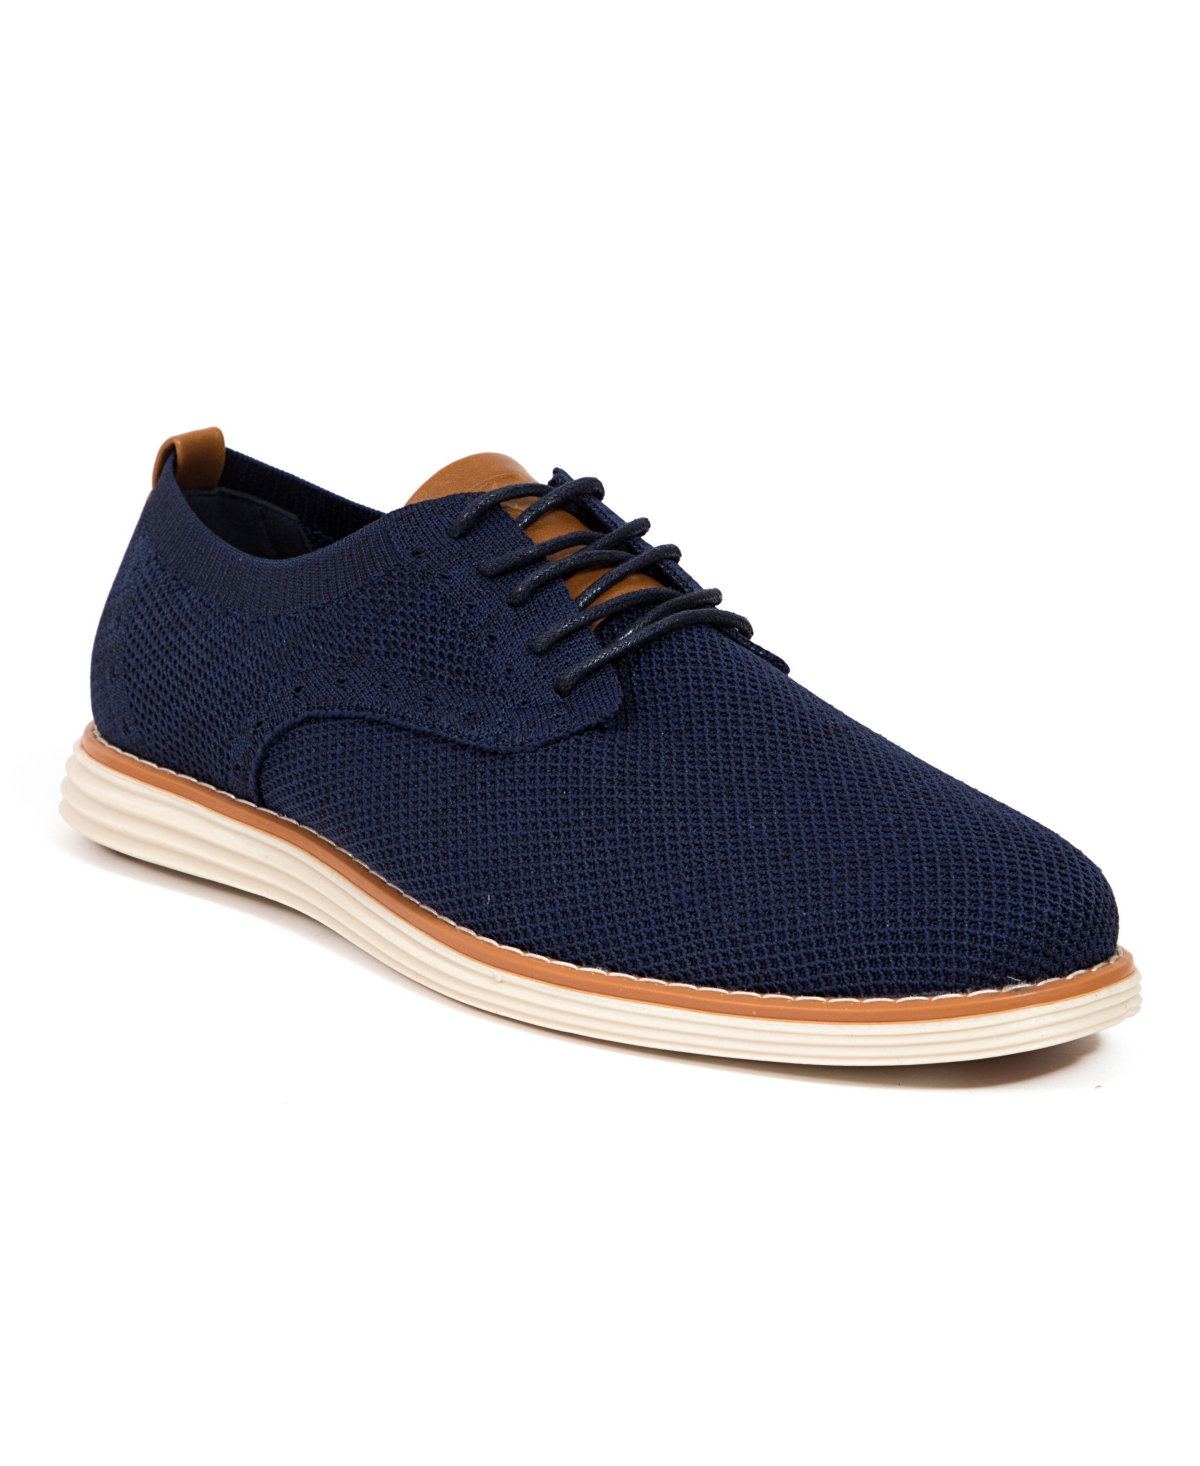 Men's Select Comfort Fashion Sneakers - Navy